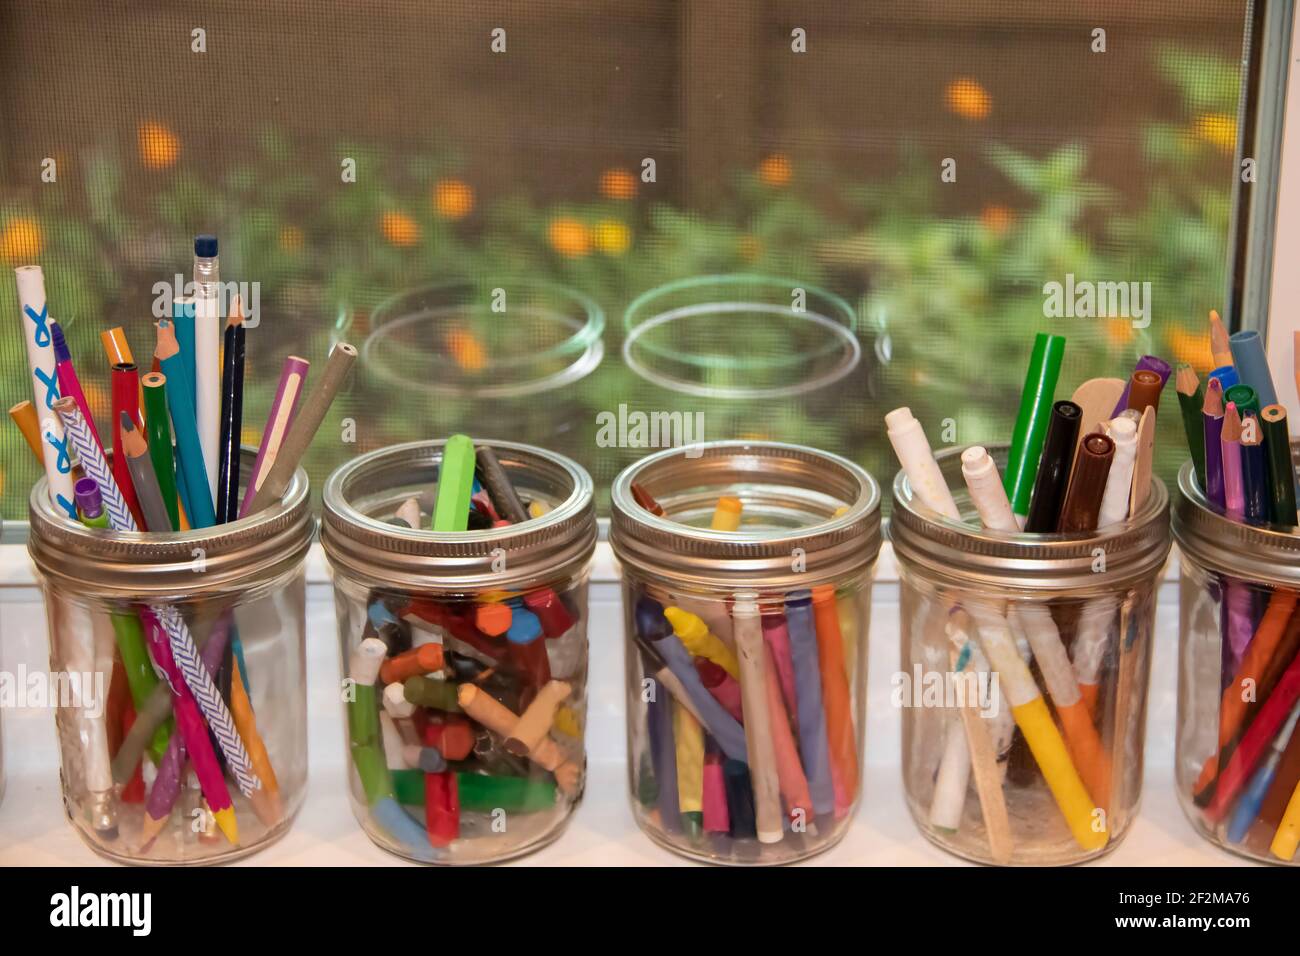 Canning jars filled with crayons, pastels and markers sitting on an open windowsill with flowers outside seen through a window screen Stock Photo